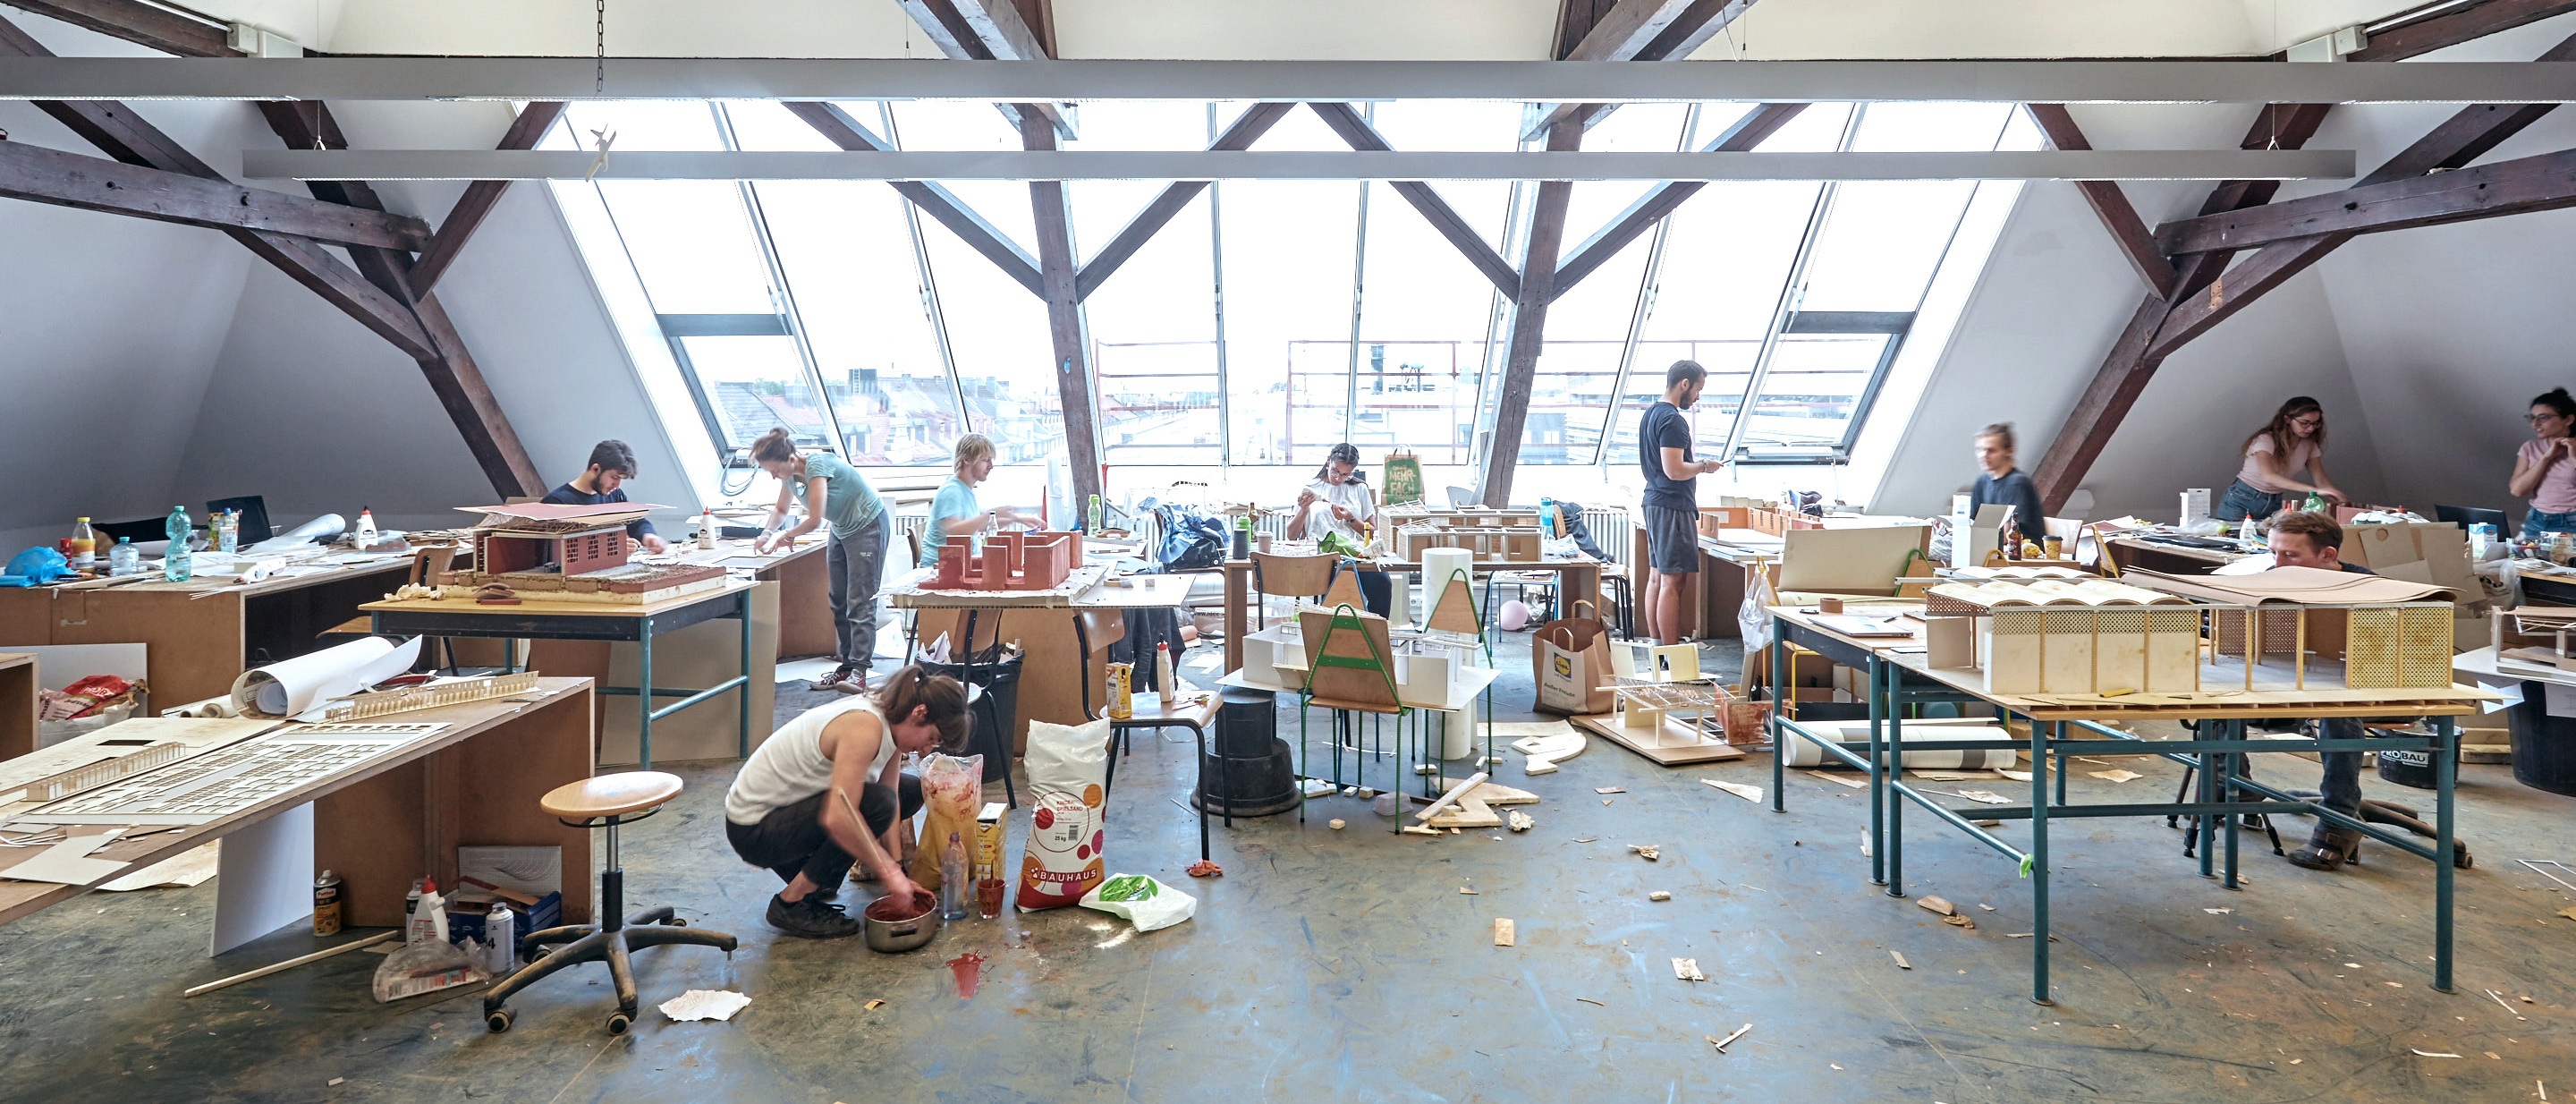 architecture students working on projects at a studio